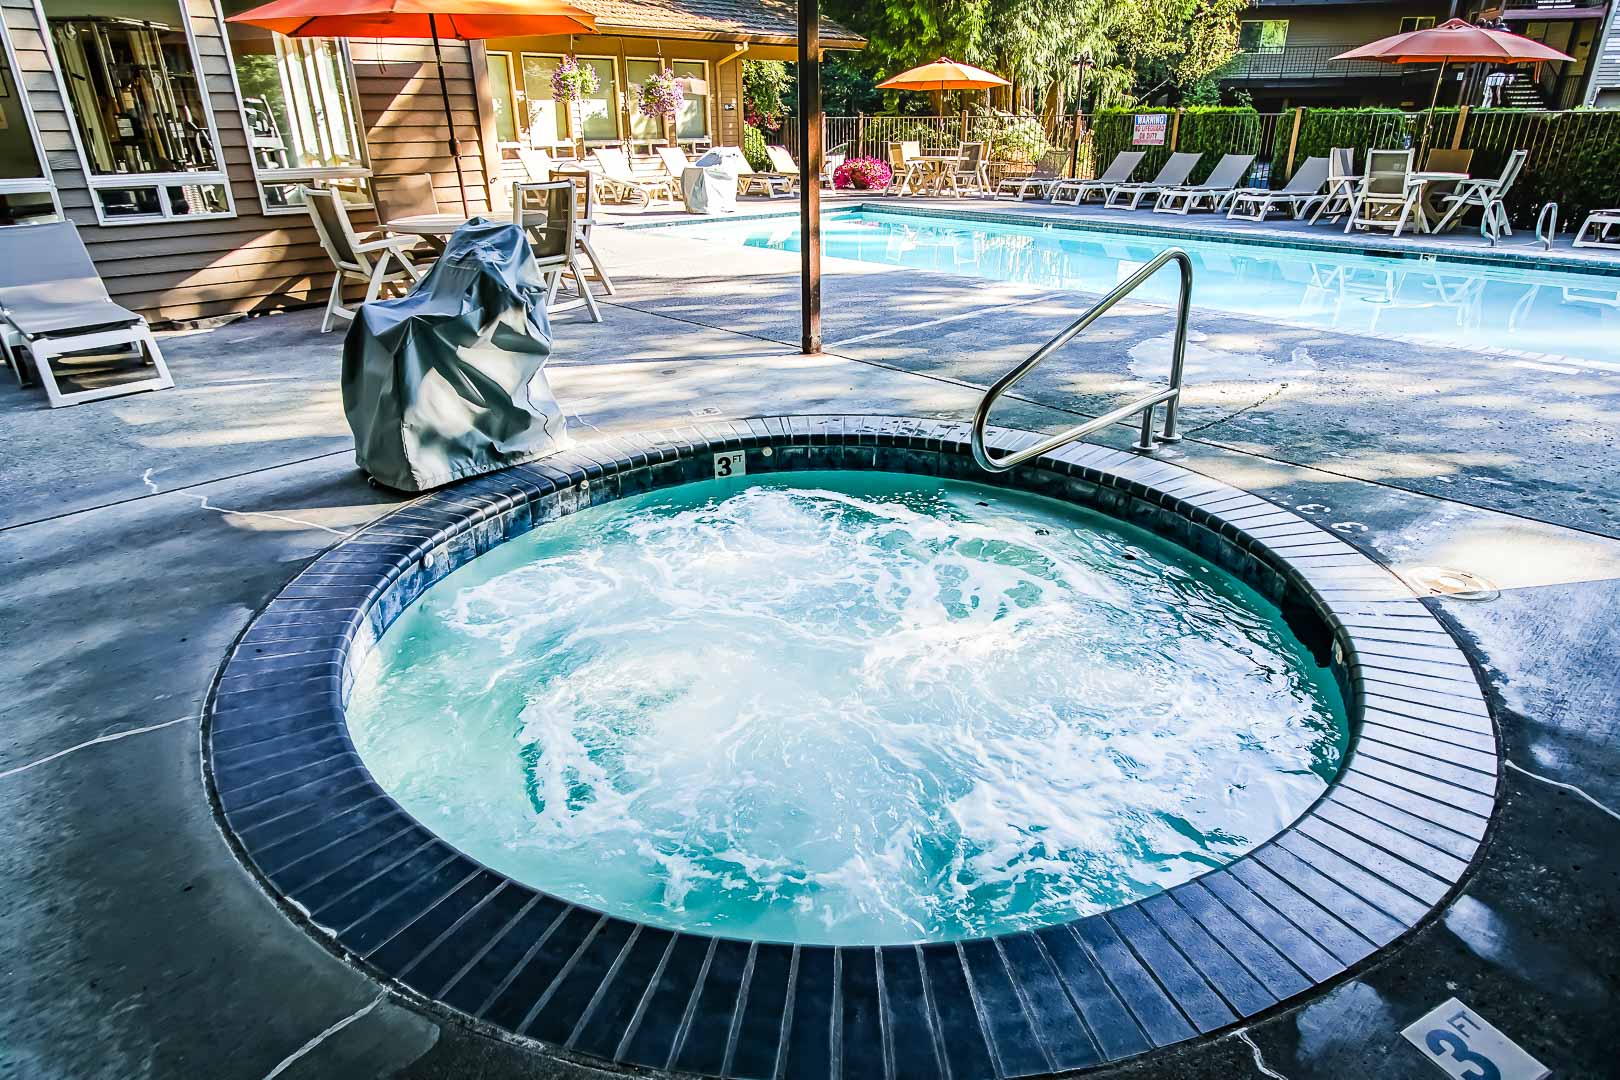 A spacious outdoor swimming pool and a jucuzzi tub at VRI's Whispering Woods Resort in Oregon.